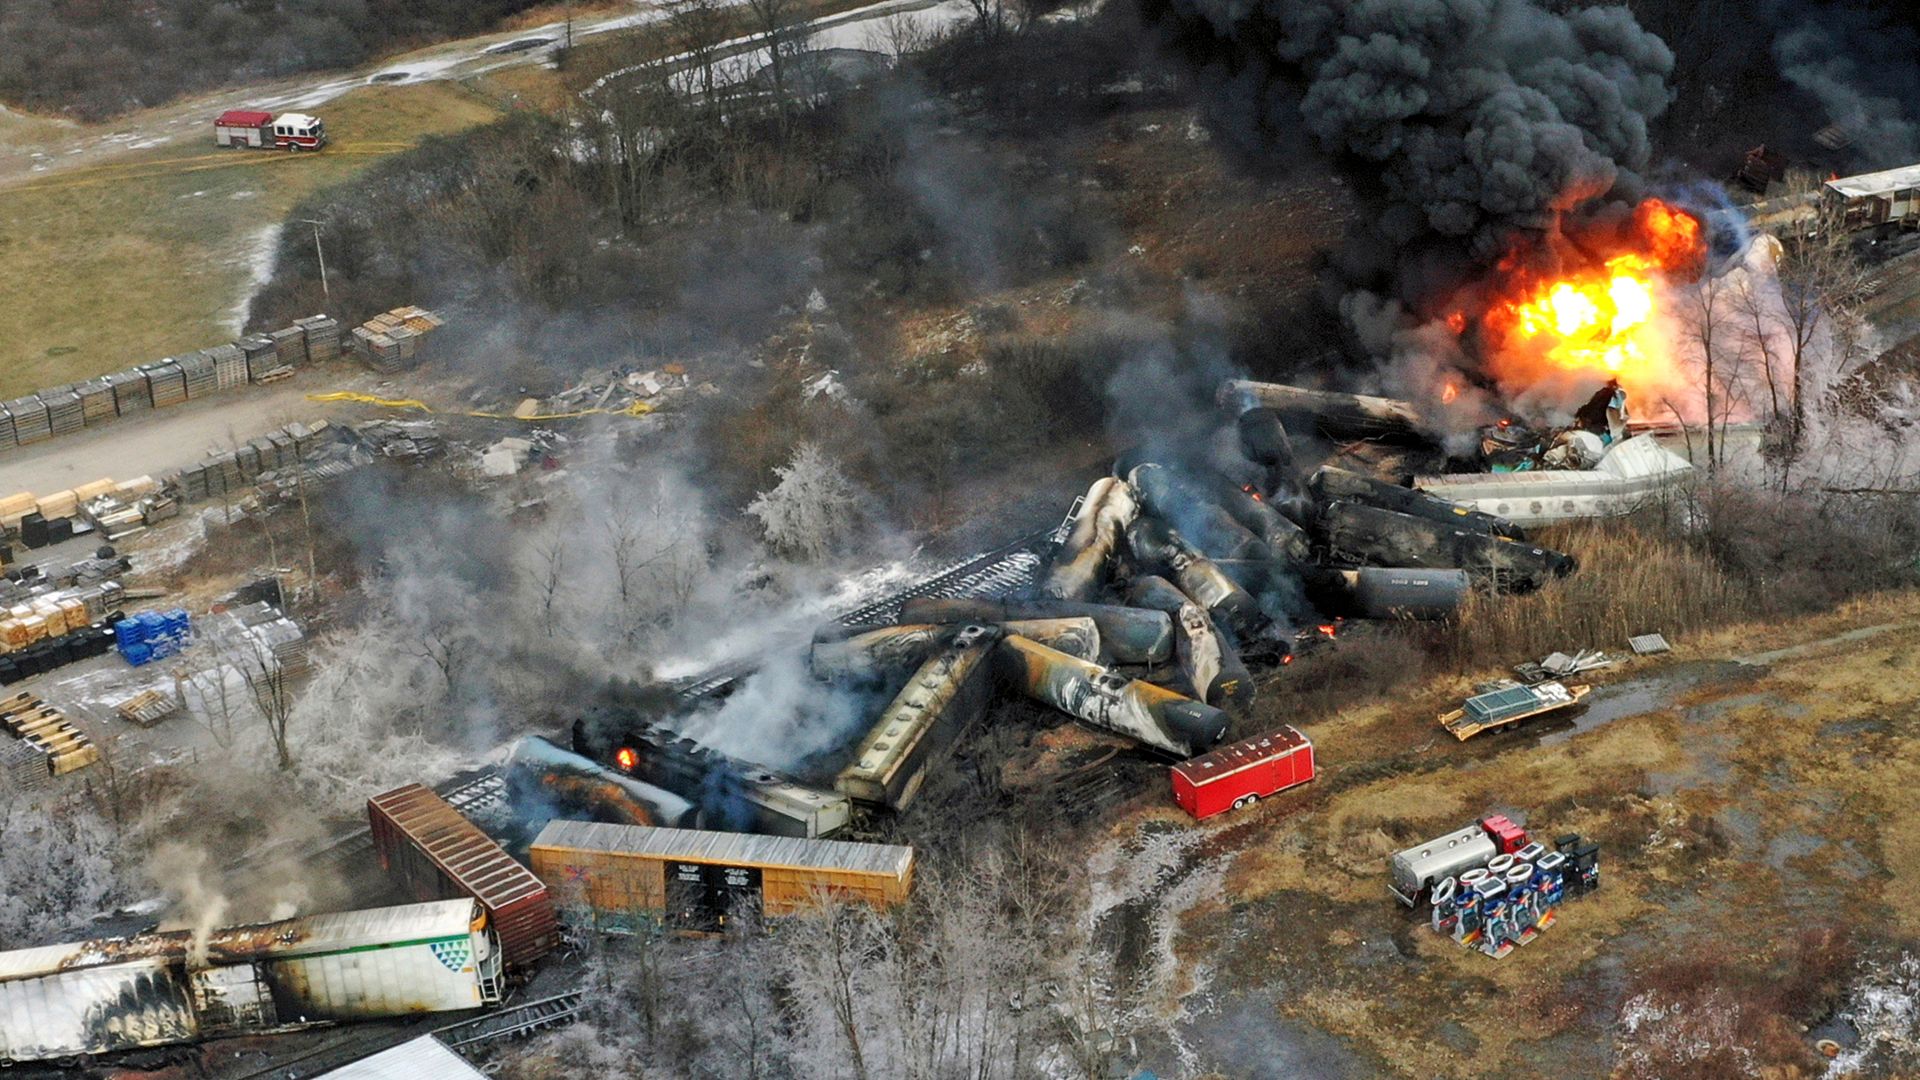 Norfolk Southern has reached a more than 0 million settlement with the federal government over an Ohio train derailment.